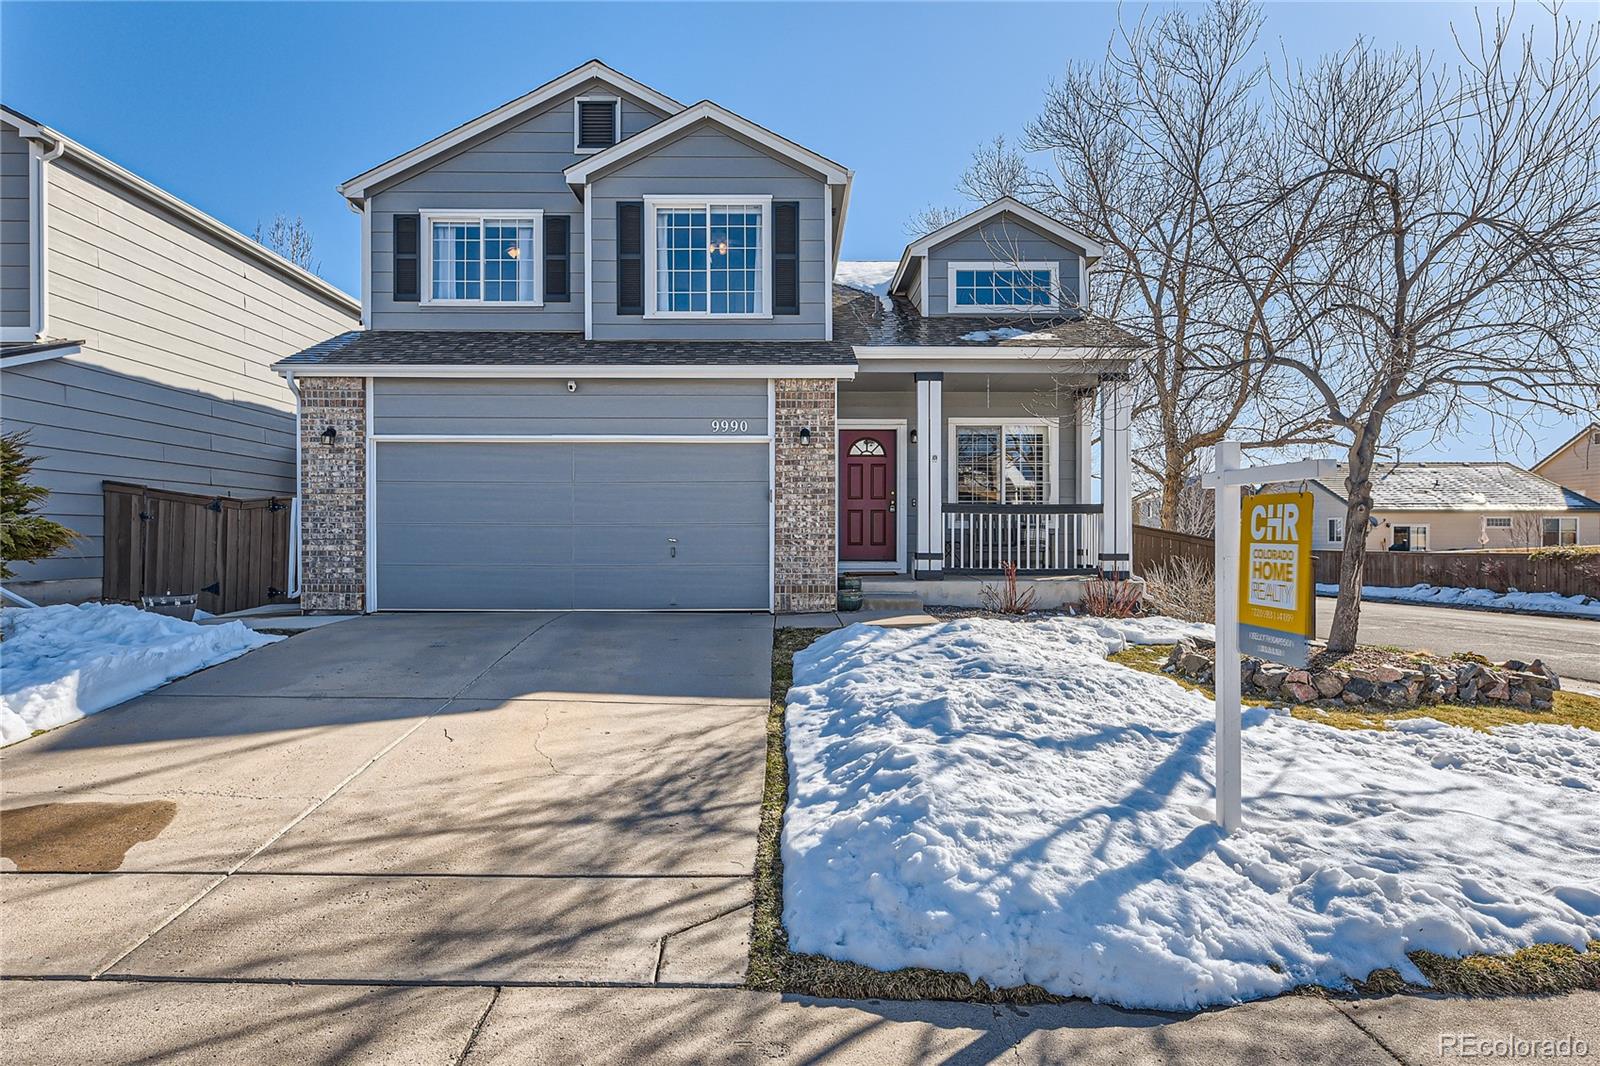 9990  apollo bay way, highlands ranch sold home. Closed on 2024-04-19 for $653,000.